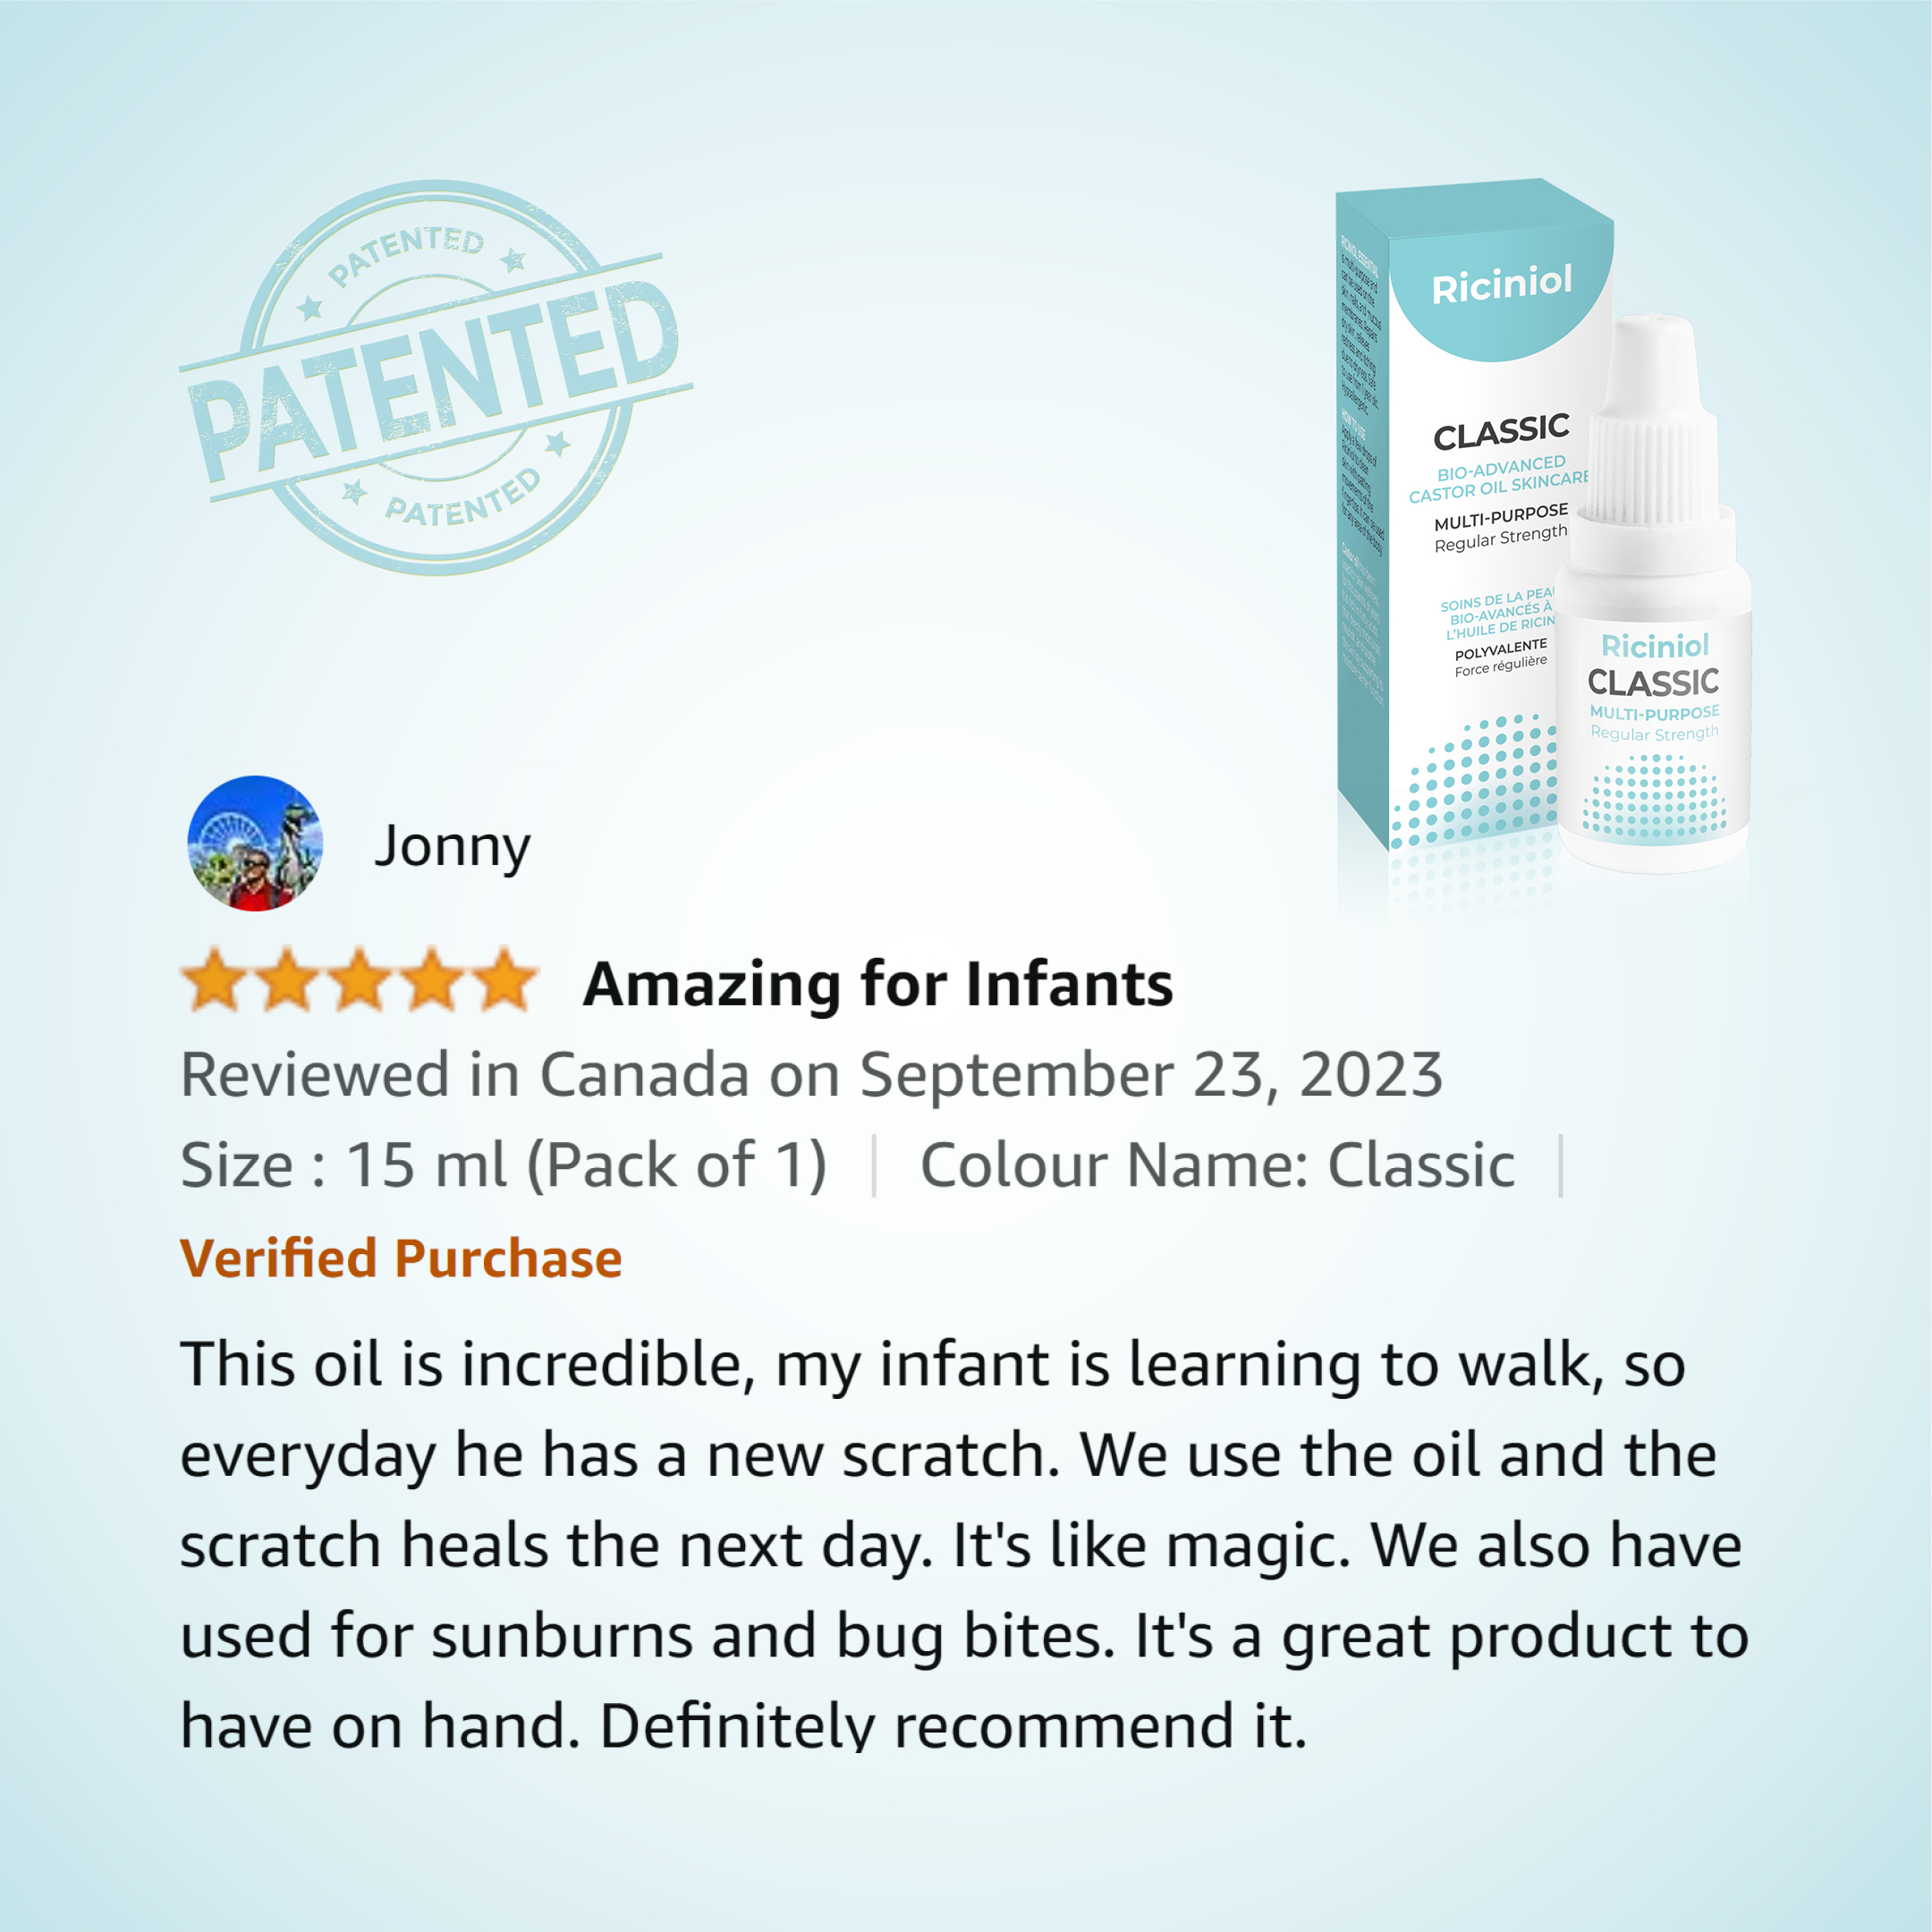 Riciniol Classic This oil is incredible, my infant is learning to walk, so everyday he has a new scratch. We use the oil and the scratch heals the next day. It’s like magic. We also have used for sunburns and bug bites. It’s a great product to have on hand. Definitely recommend it.